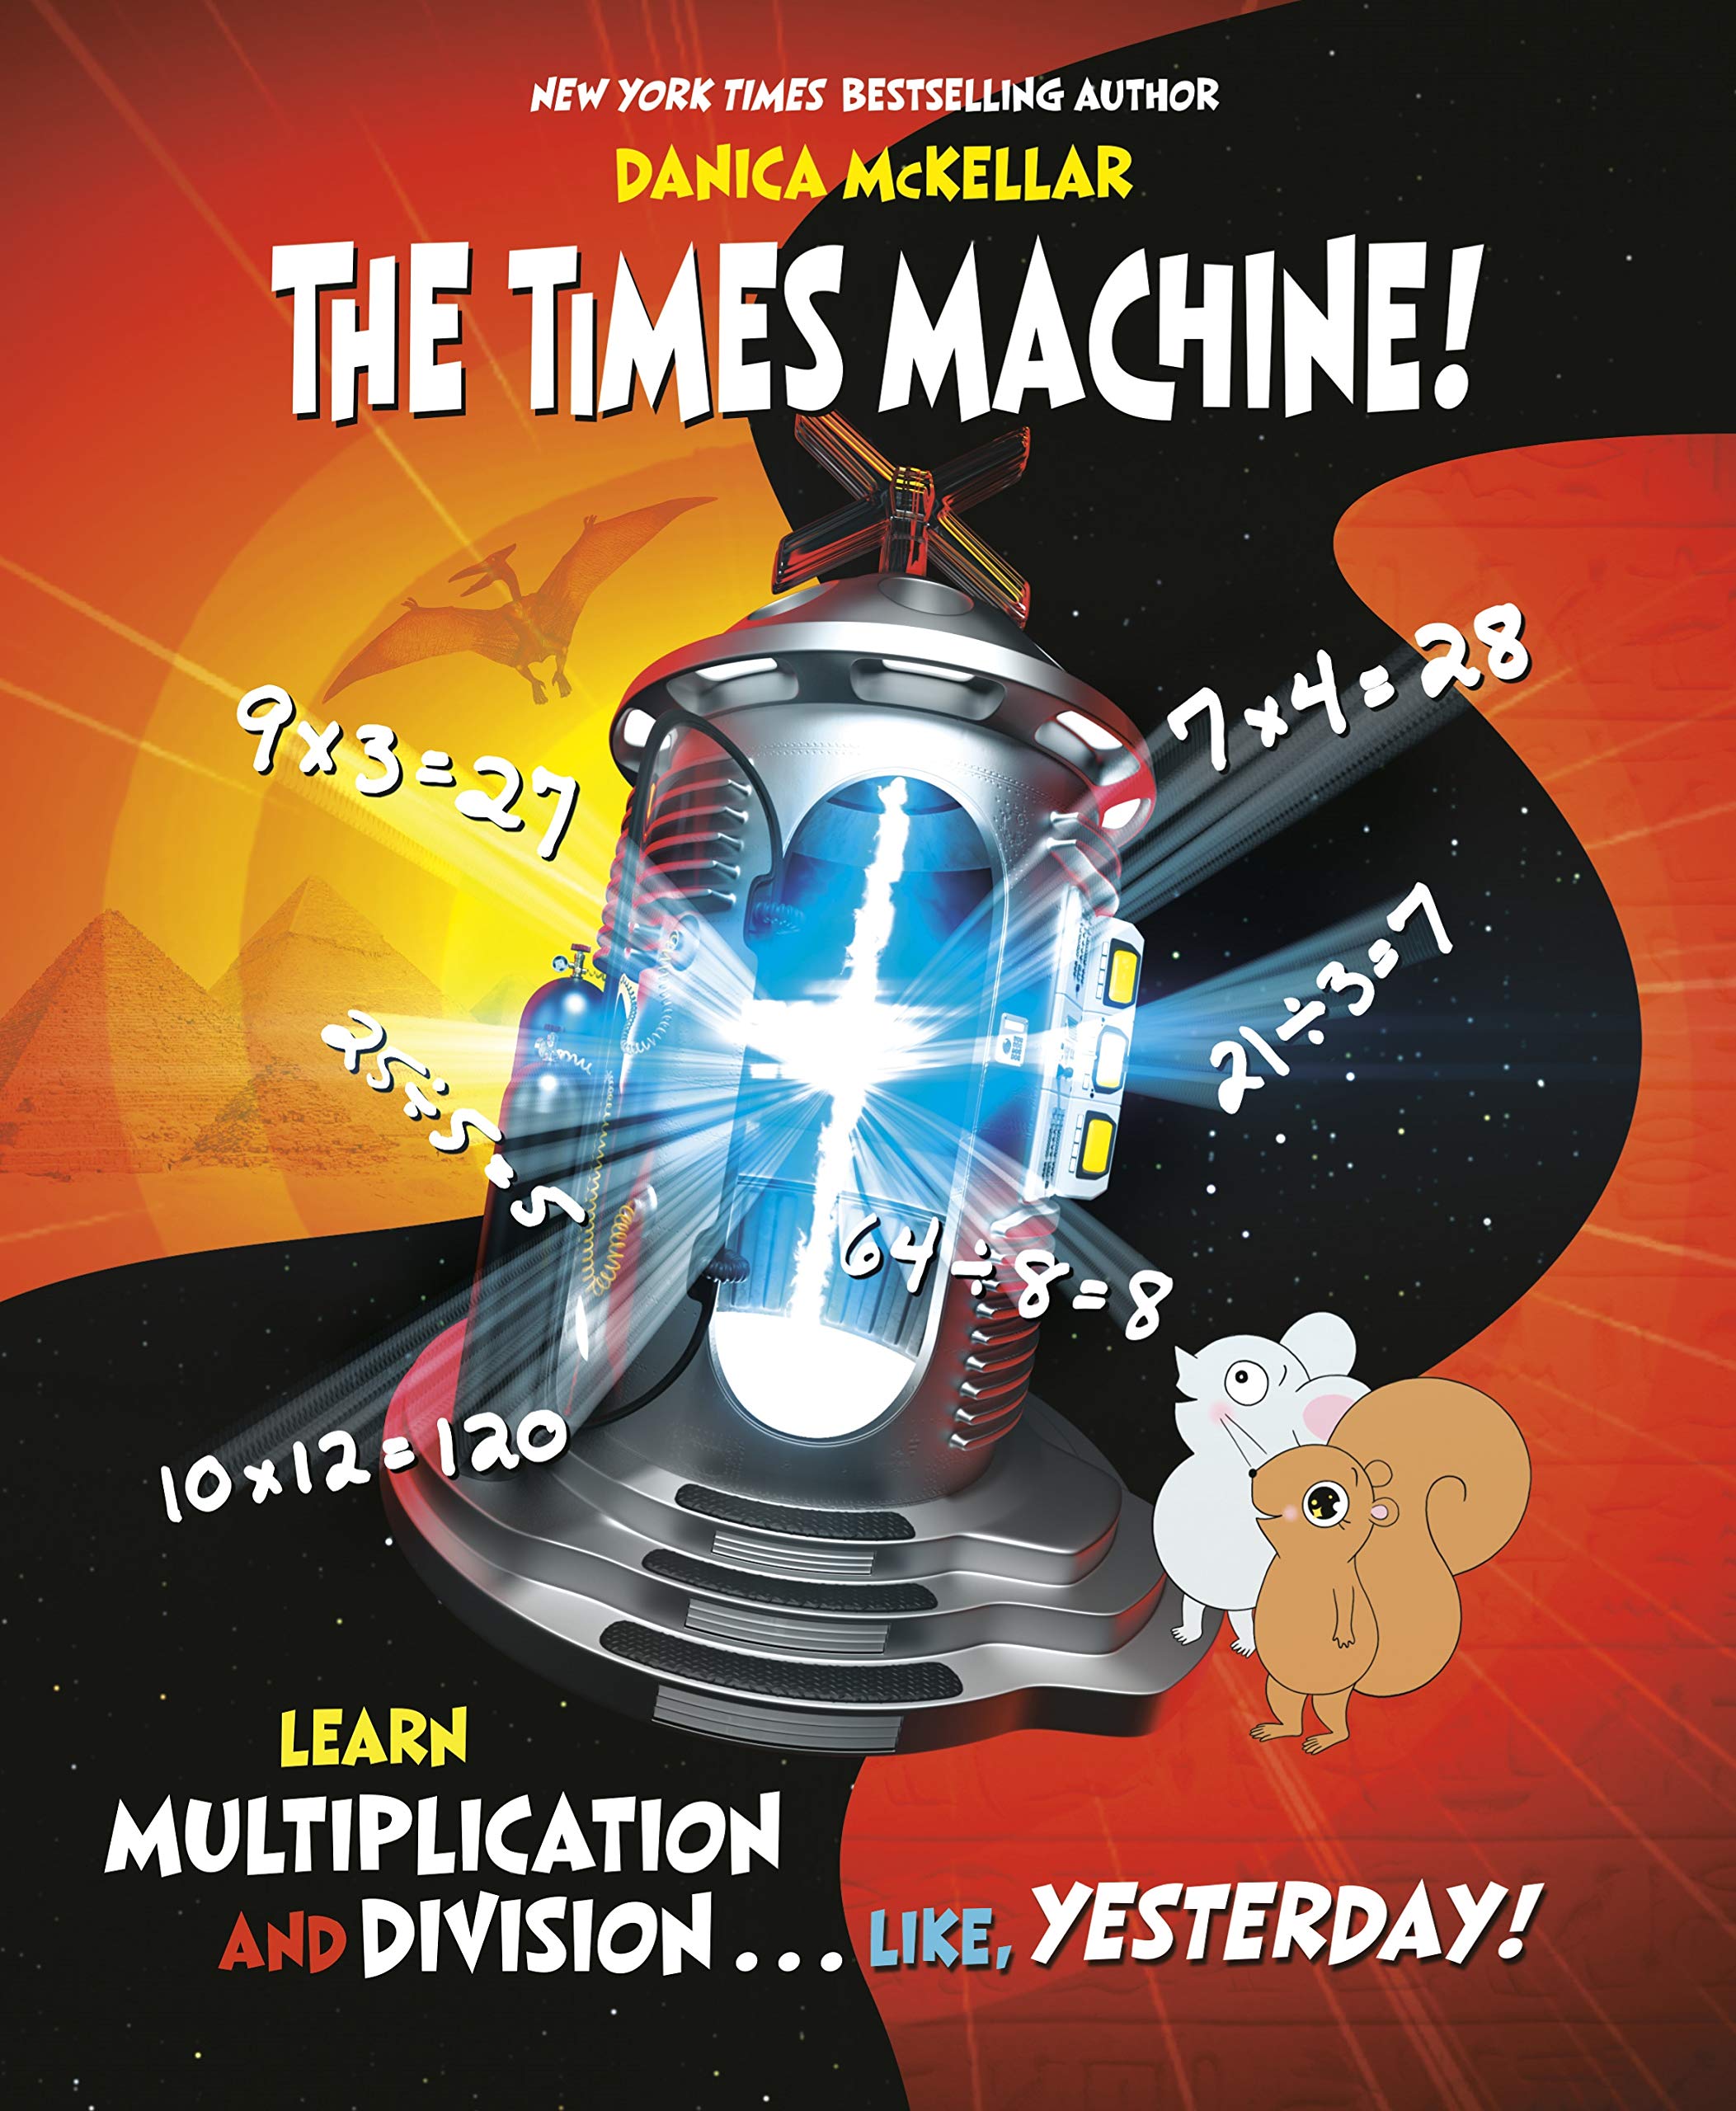 The Times Machine! Learn Multiplication and Division...like, Yesterday!